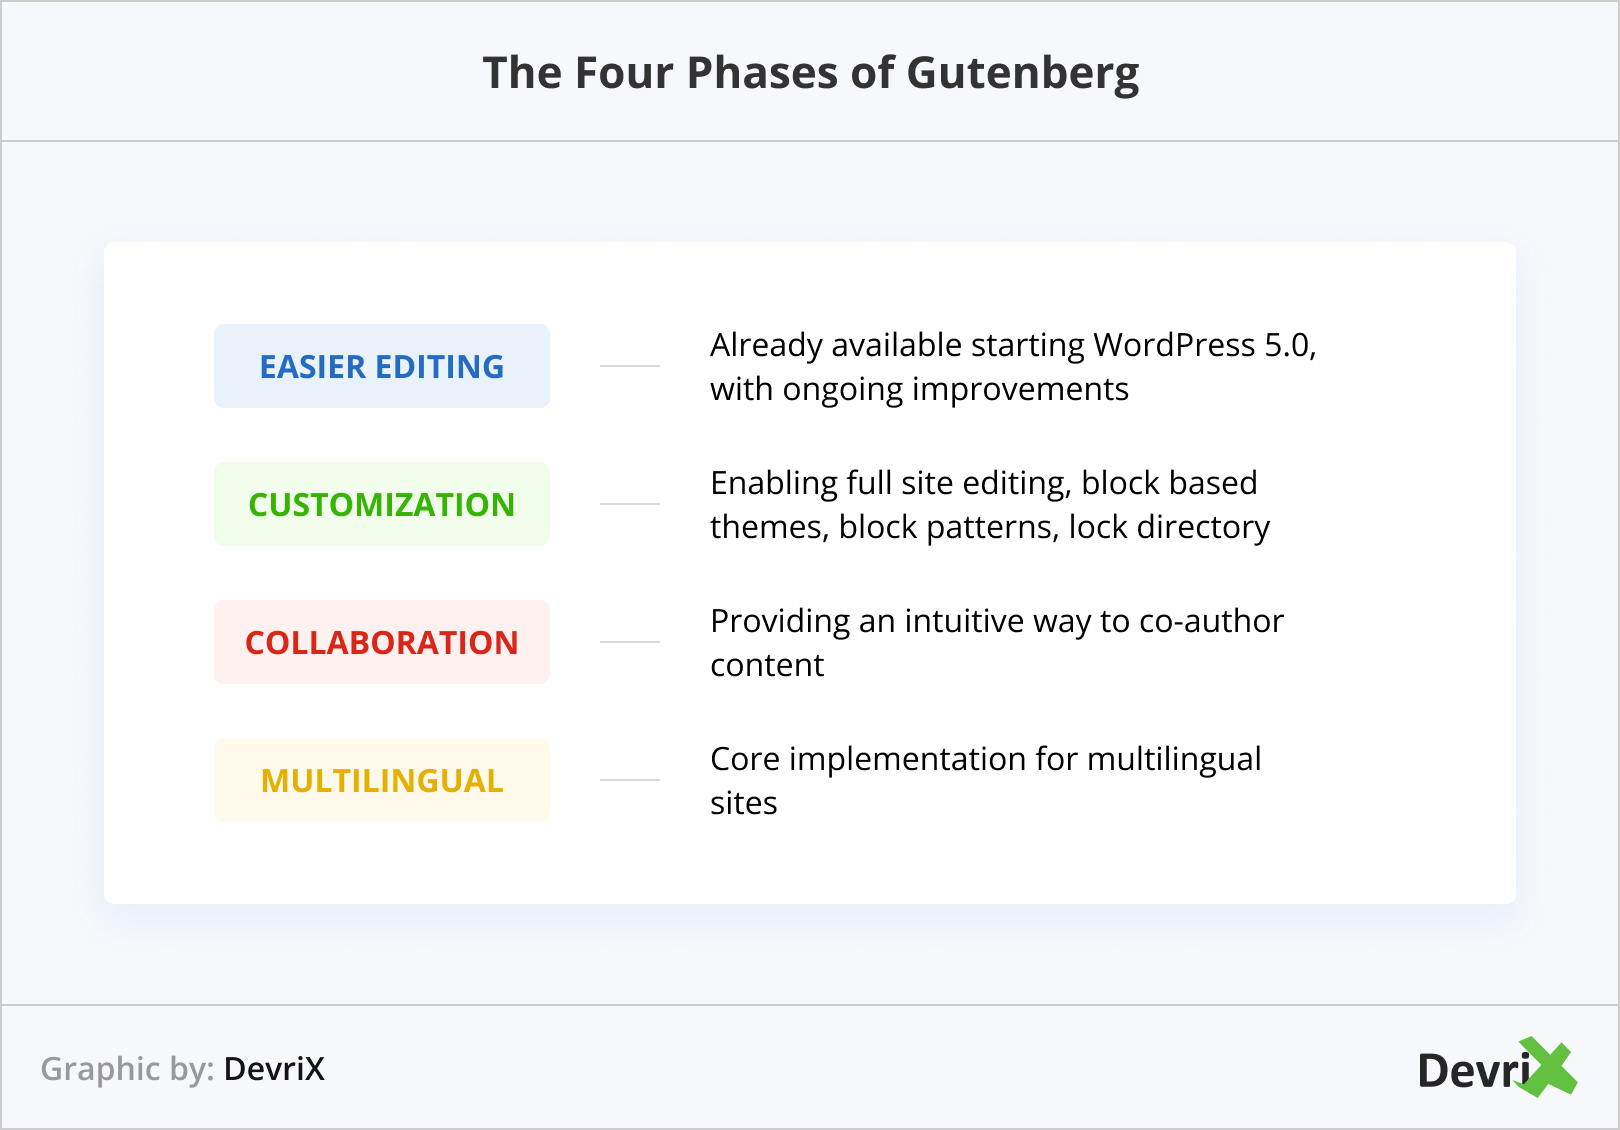 The Four Phases of Gutenberg